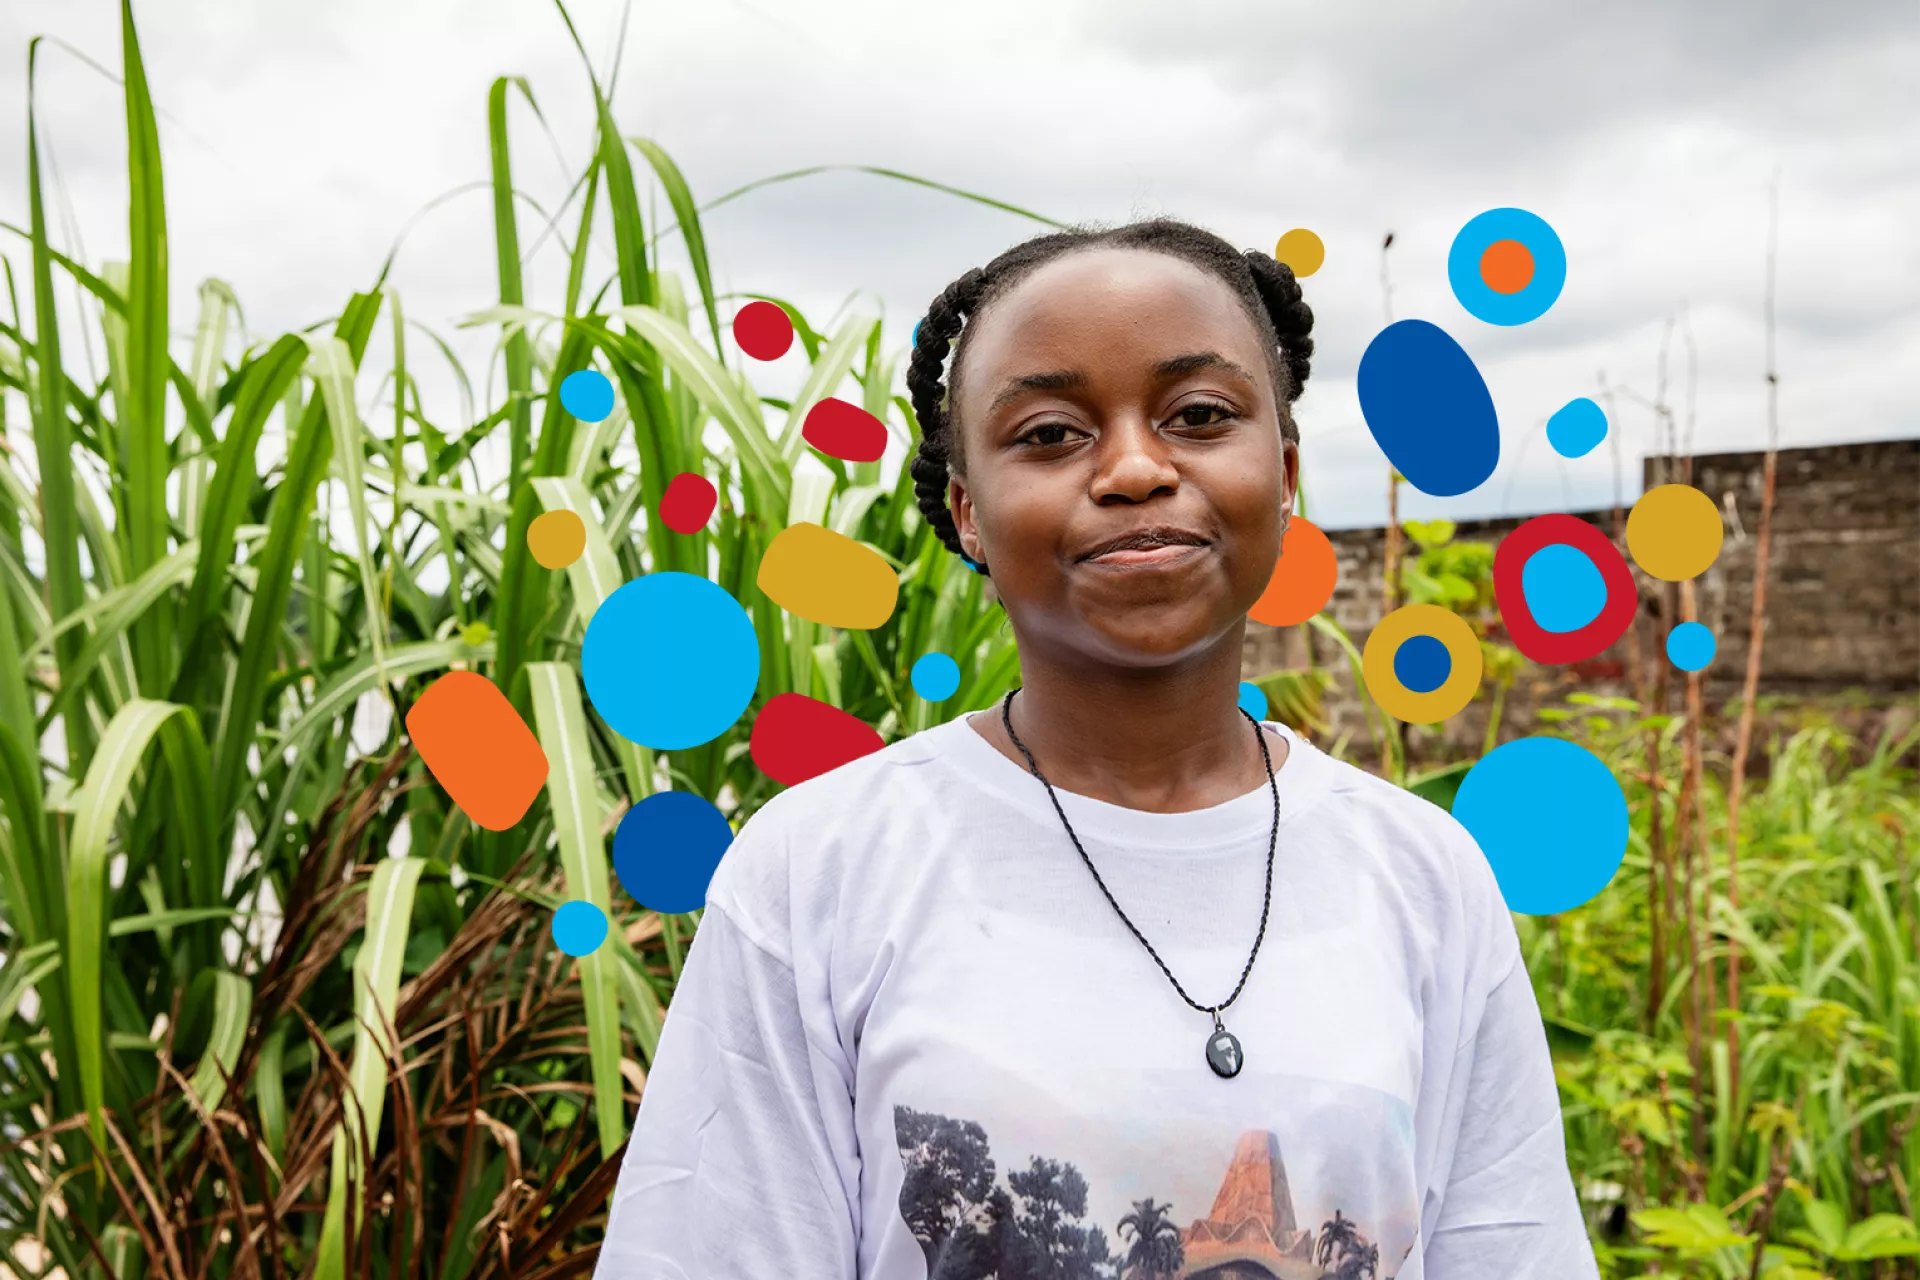 Zahirine, 16, is part of a group of young people (between 4 and 18 years old) who are mobilizing to remove waste from their neighborhood in the commune of Mont Ngafula in Kinshasa.